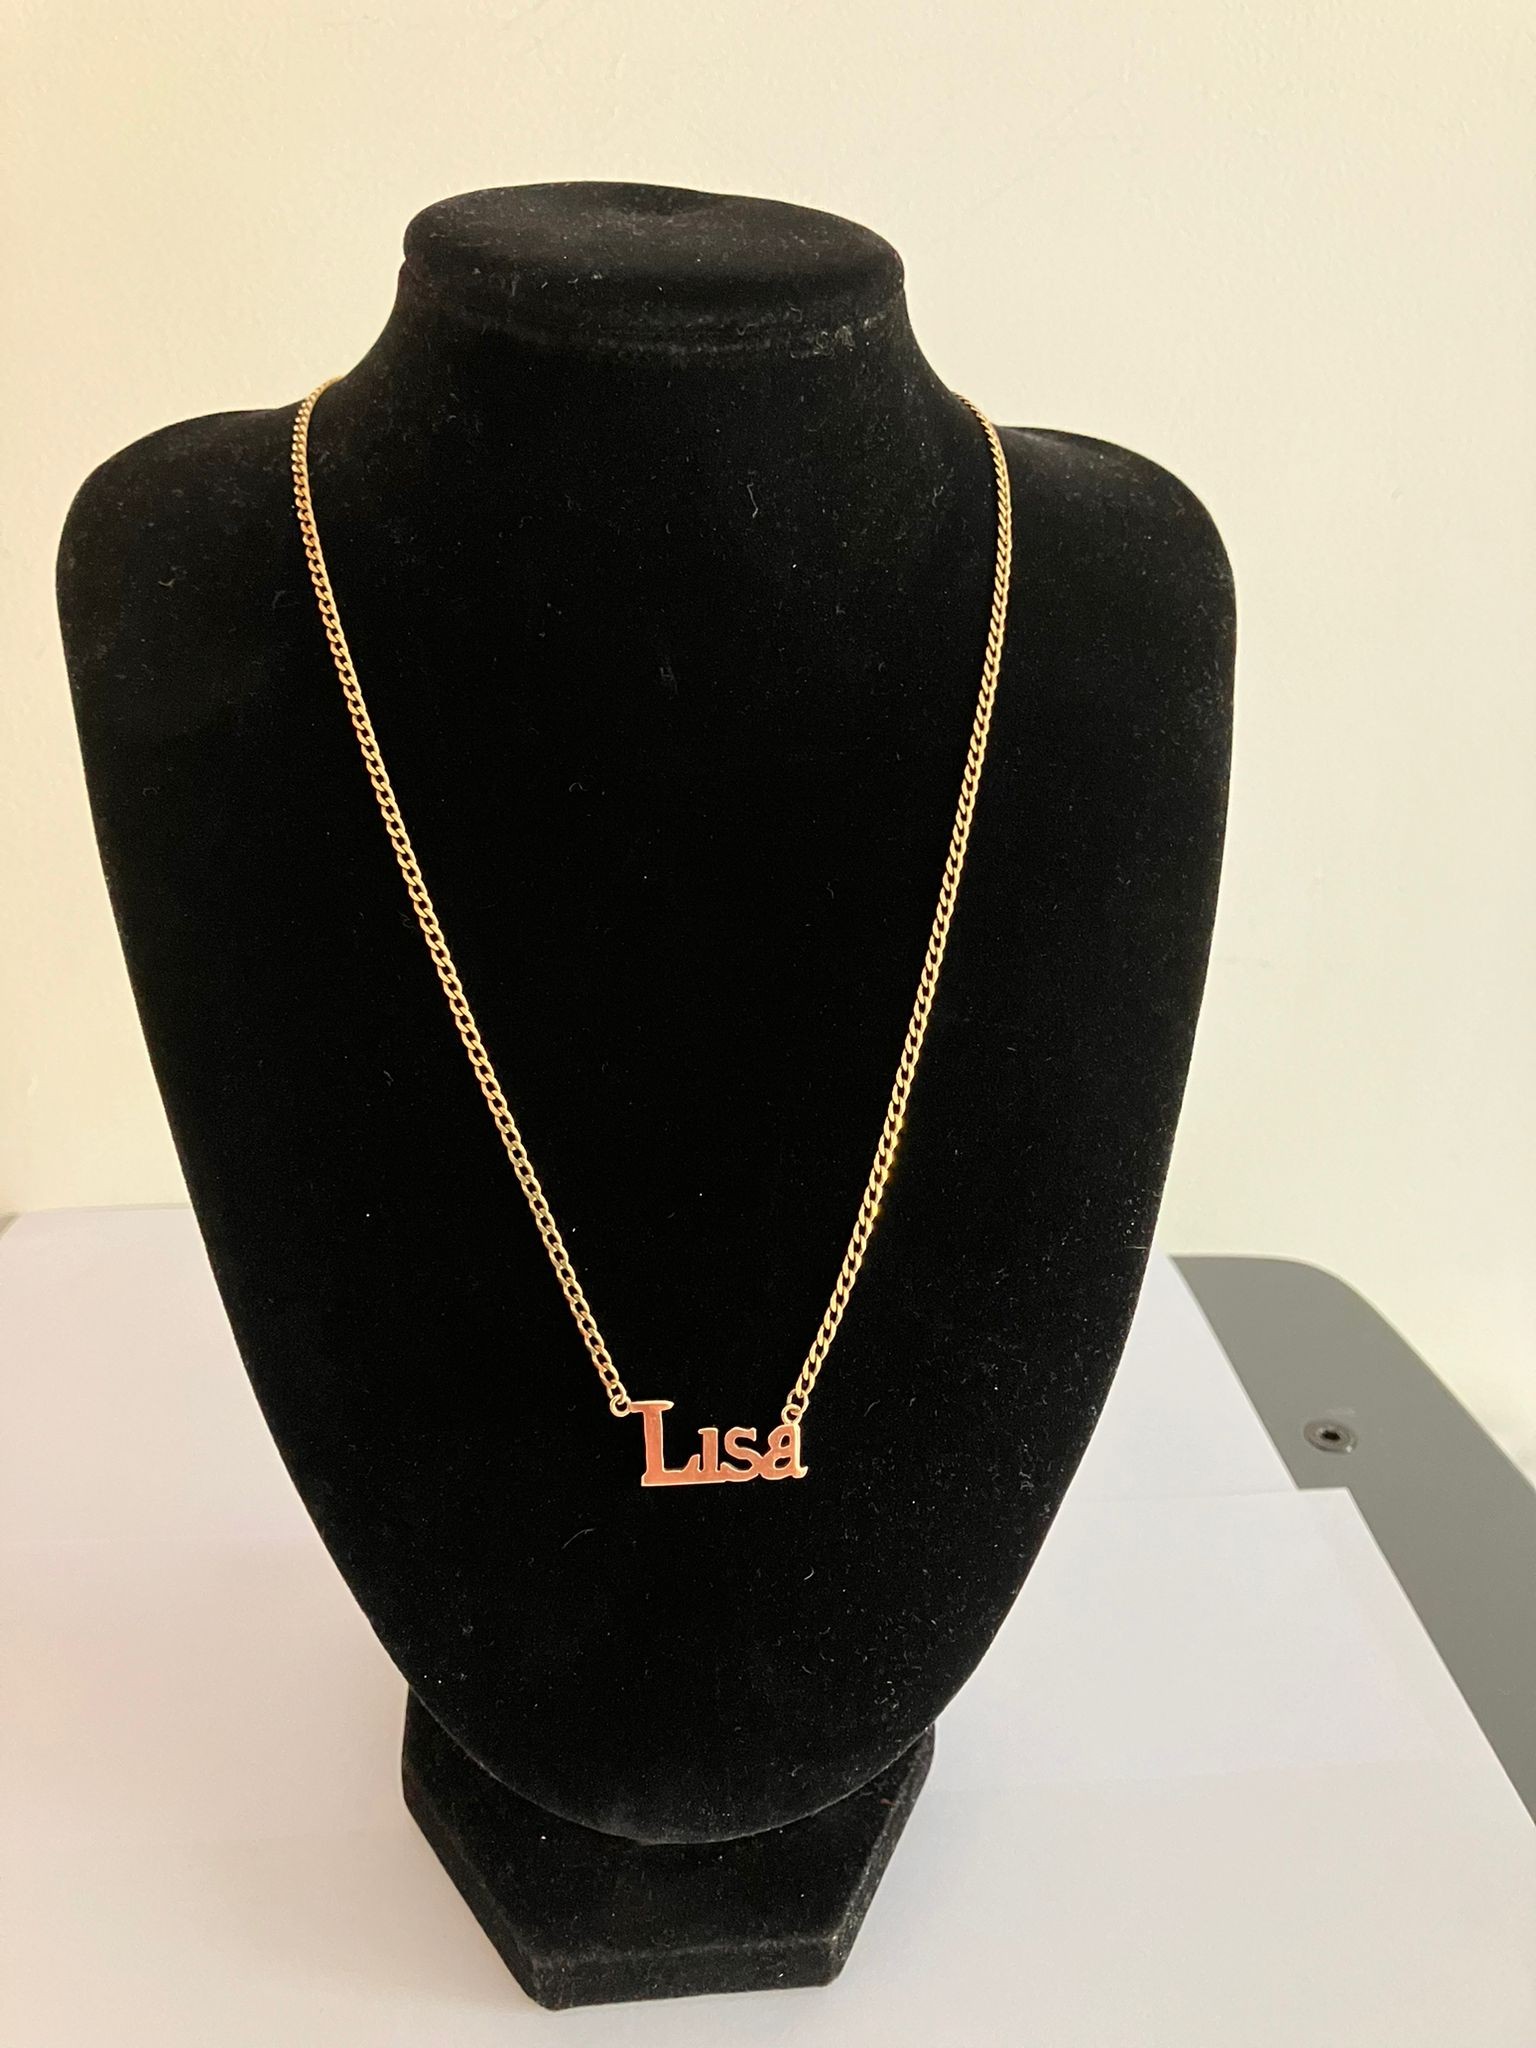 9 carat GOLD, CURB CHAIN NECKLACE with name of LISA. Full UK hallmark. 5.7 grams. 46 cm. - Image 4 of 11